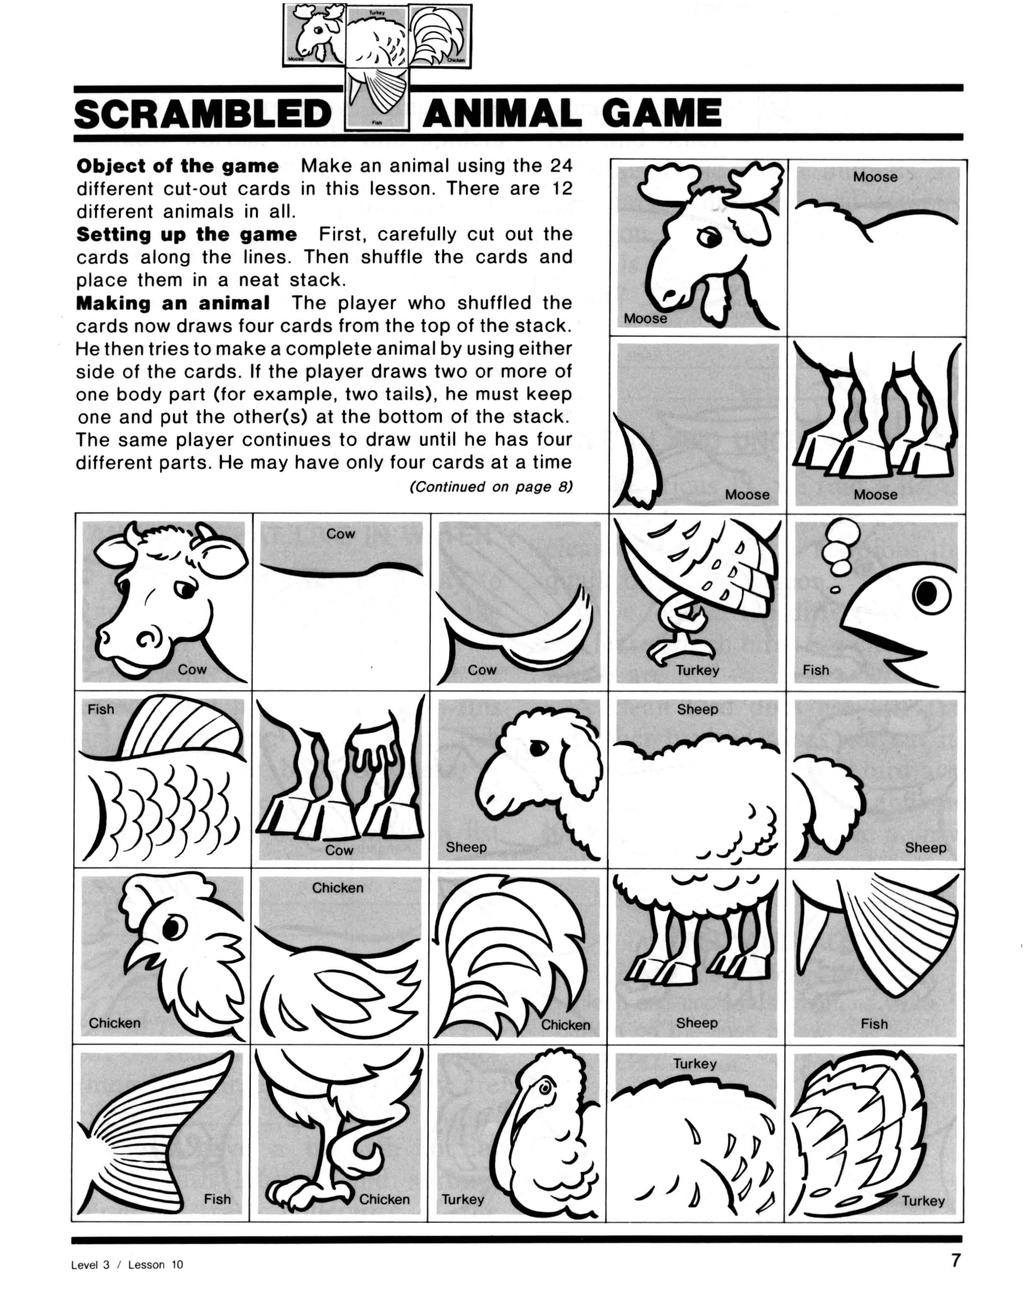 SCRAMBLED ANIMAL GAME Object of the game Make an animal using the 24 different cut-out cards in this lesson. There are 12 different animals in all.